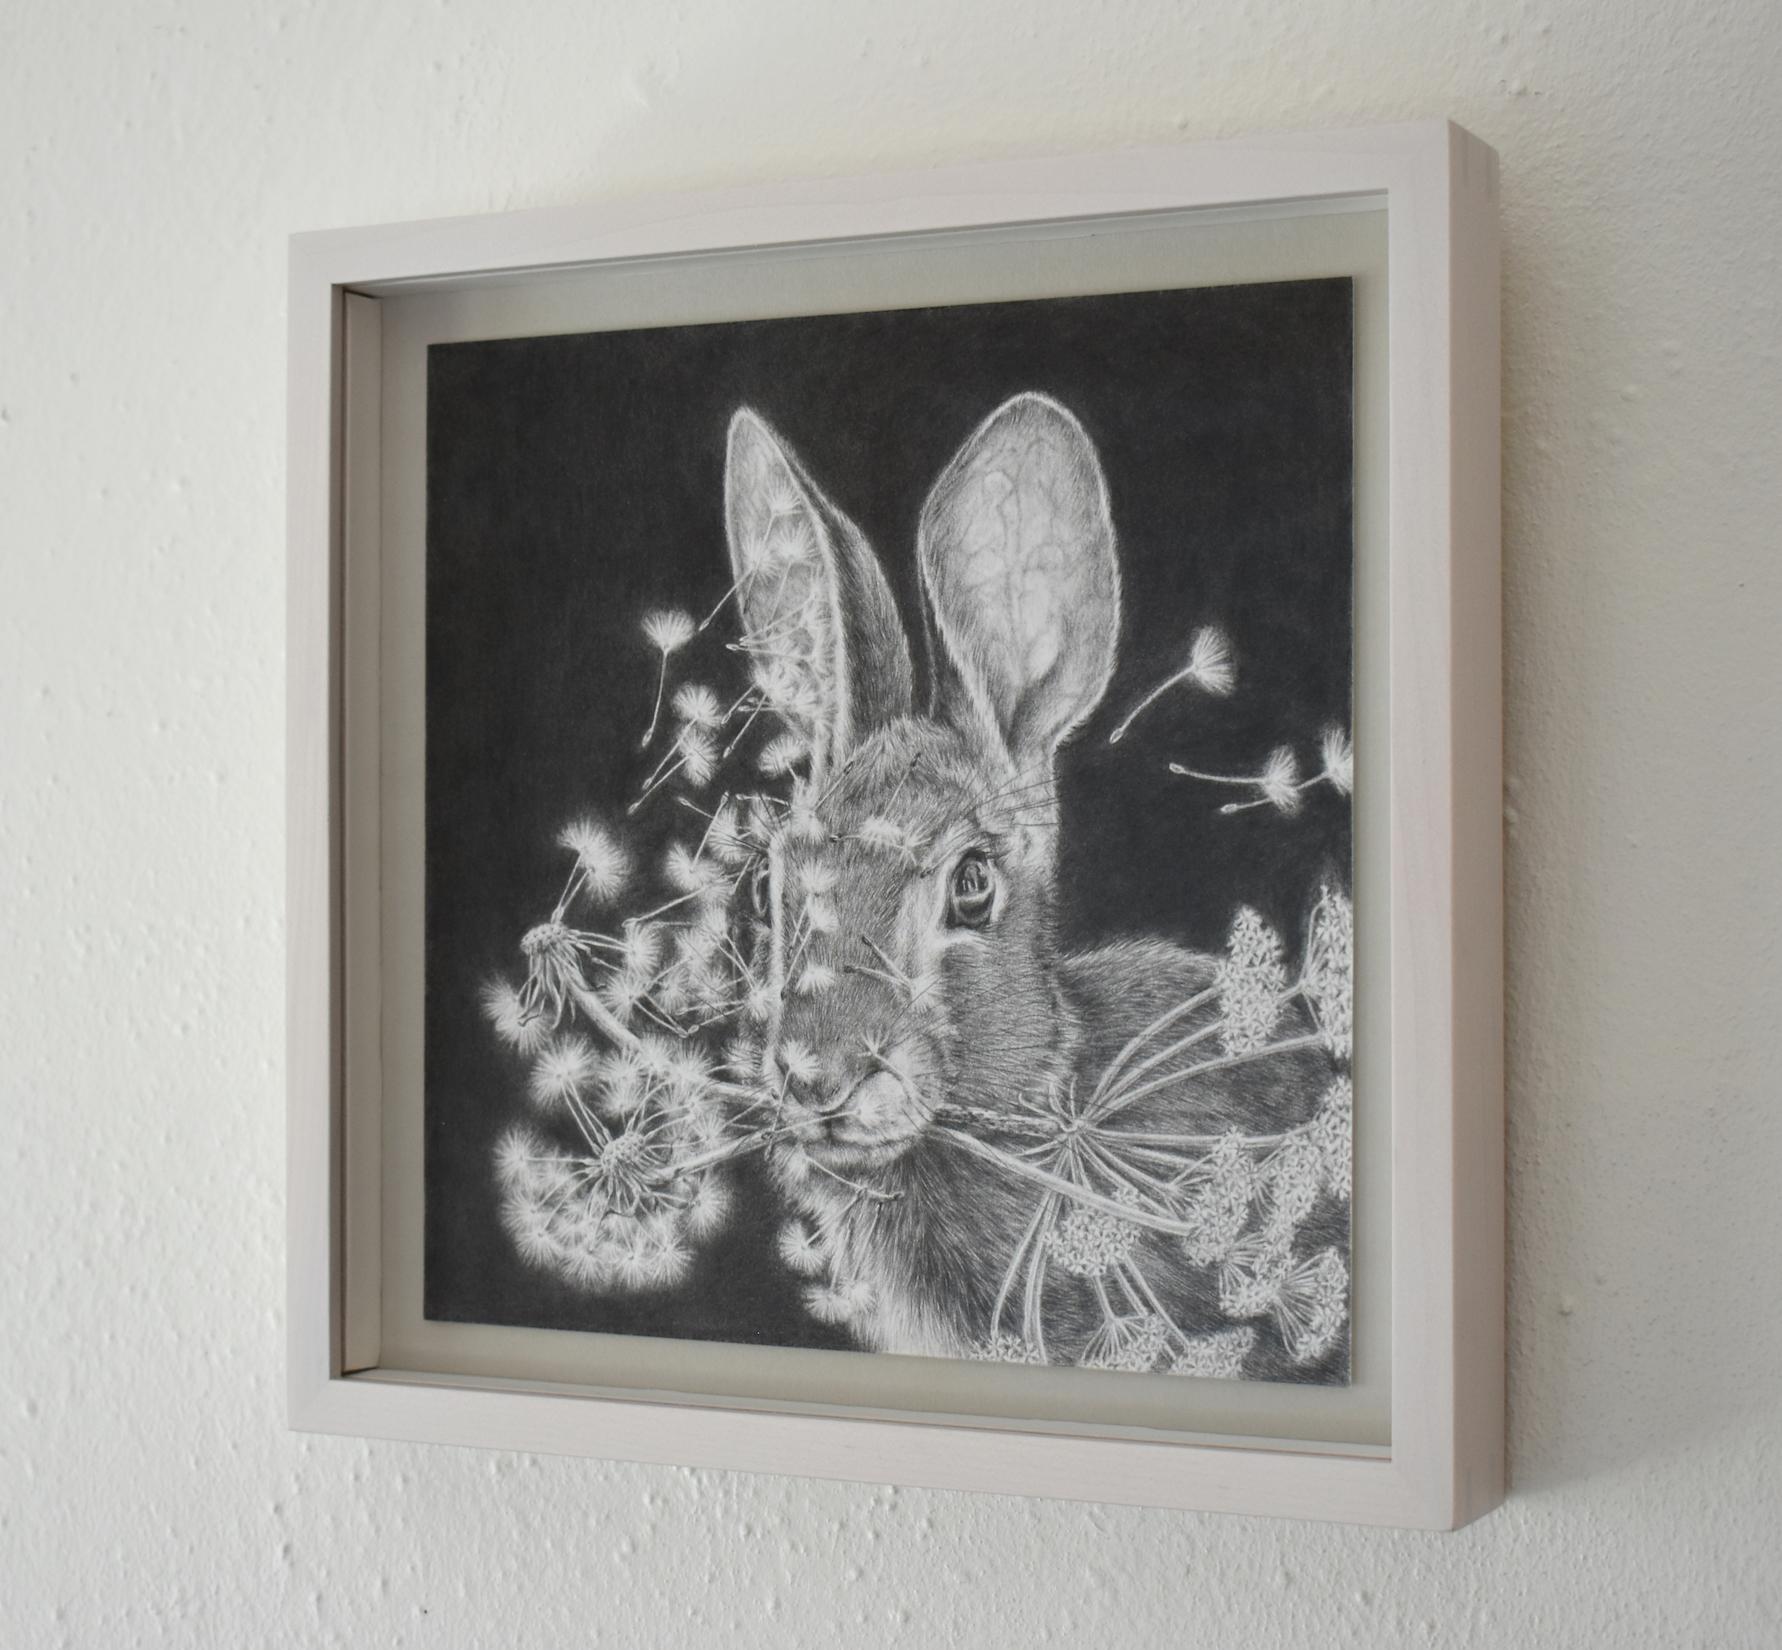 Graphite drawing on Bristol paper of a rabbit surrounded by floating bits of dandelions gone to seed against a dark black background. Fox's excellent use of material allow her to blend multiple images together, creating a seamless image with layers